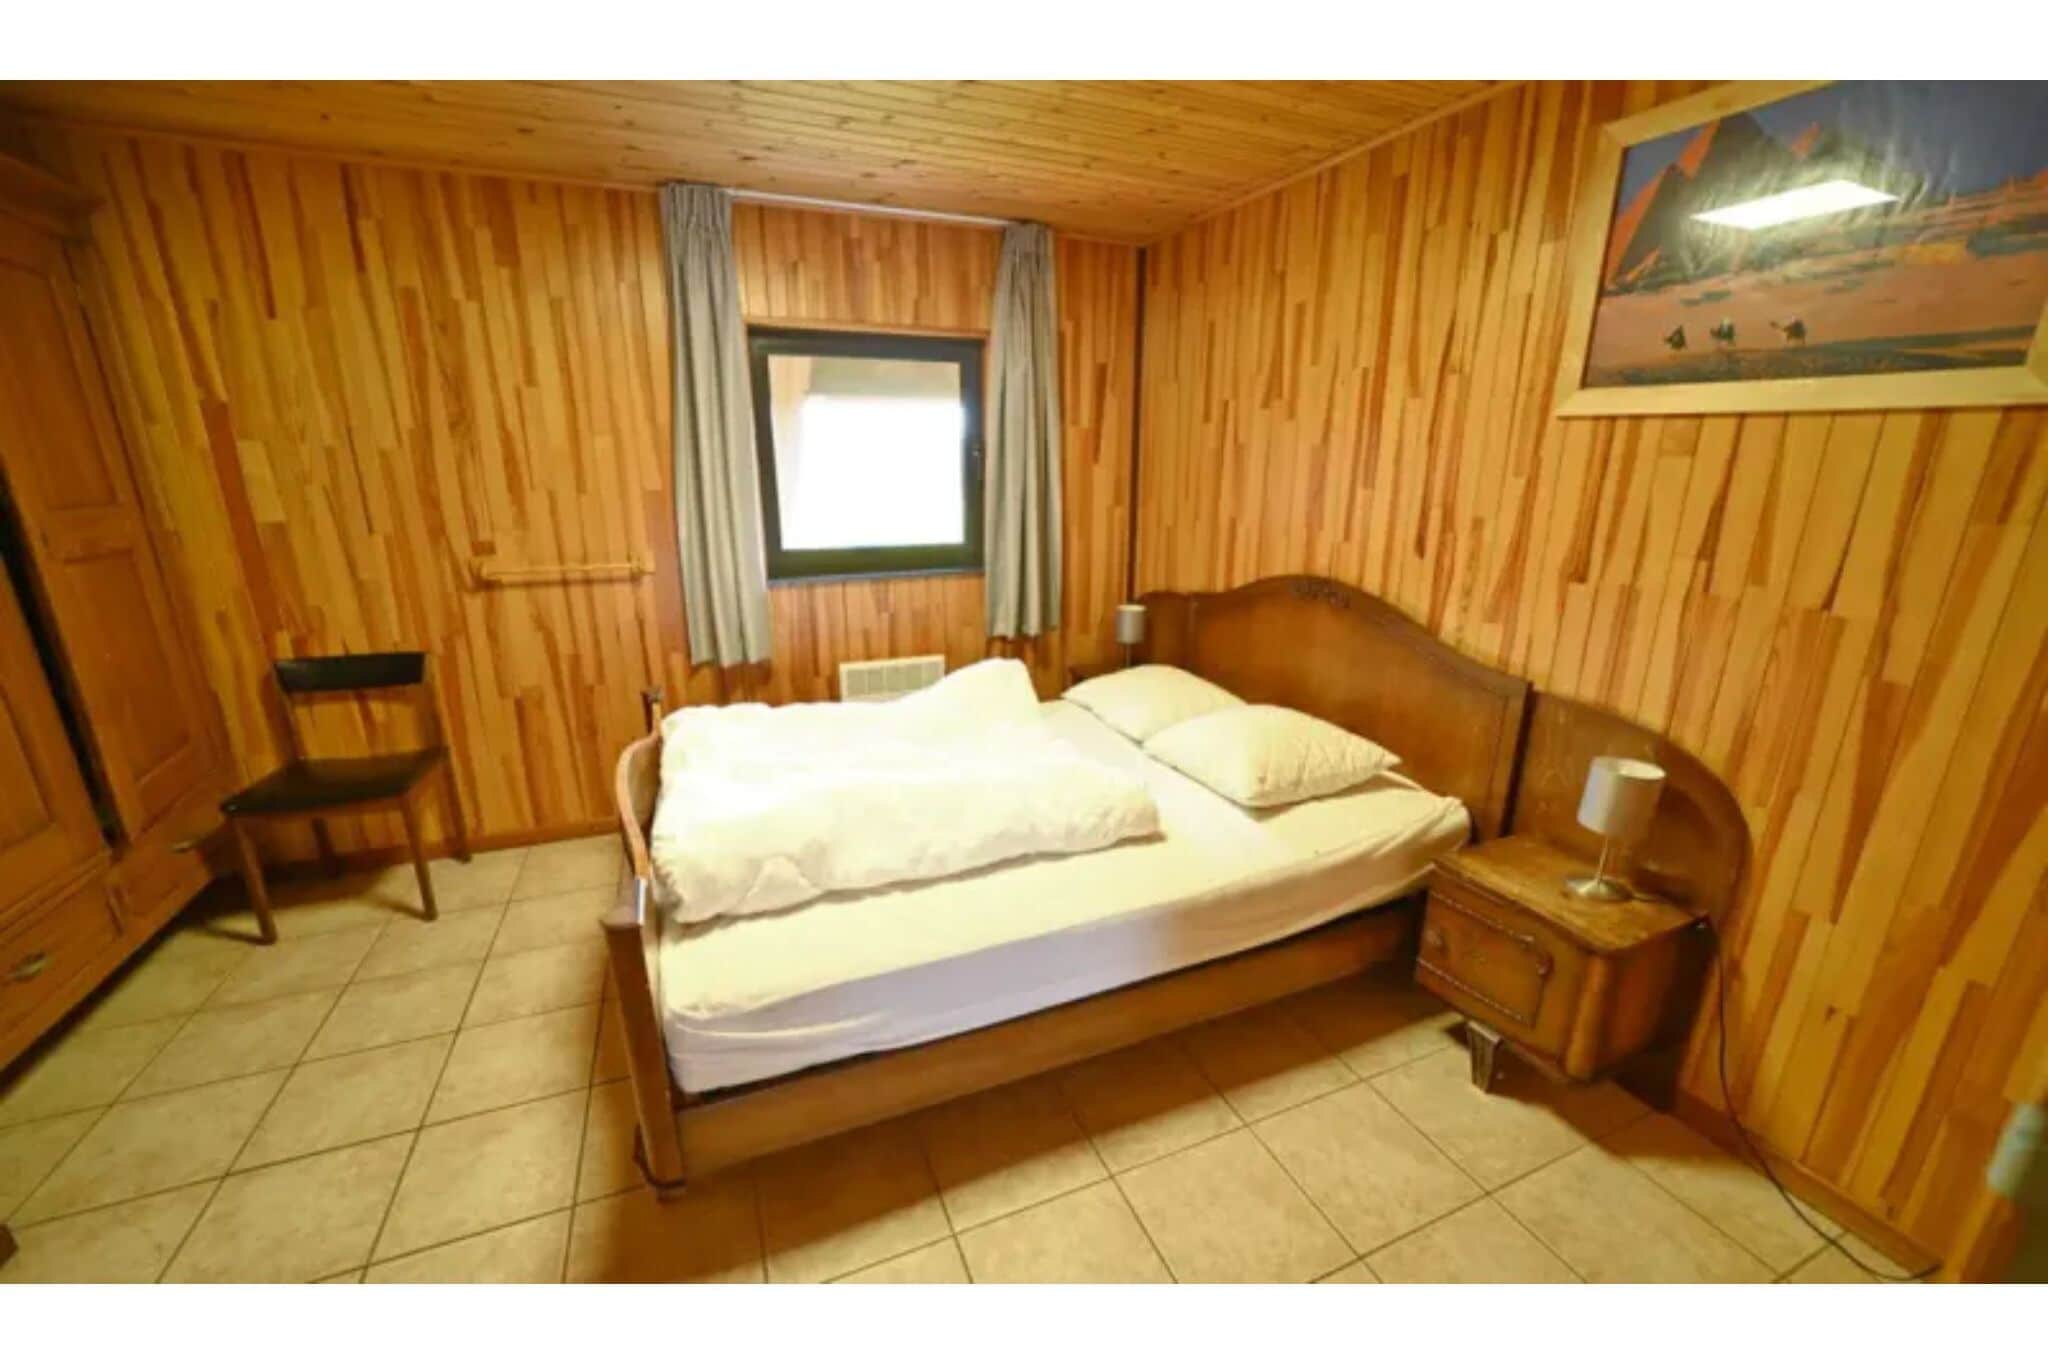 A beautiful wooden villa for 12 people.